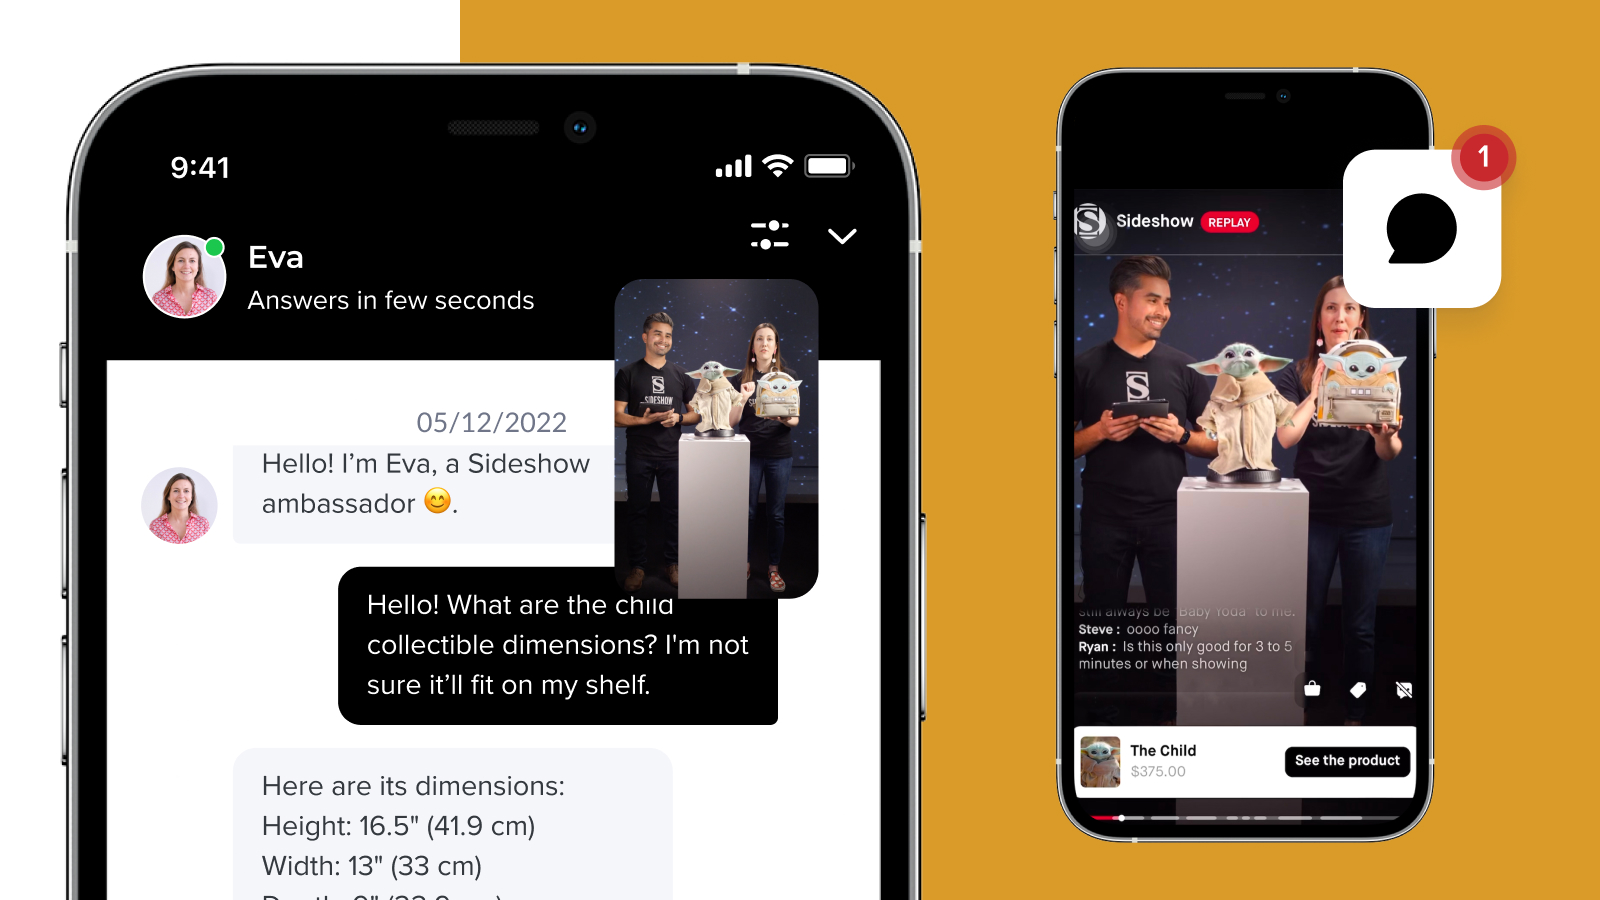  Featured image: Header image for Conversational Replay. The image shows how the feature works, where you can message with a customer service rep while you watch the replay of a live shopping event.  - Read full post: Conversational Replay: Unleash the Full Potential of Your Live Shopping Replays